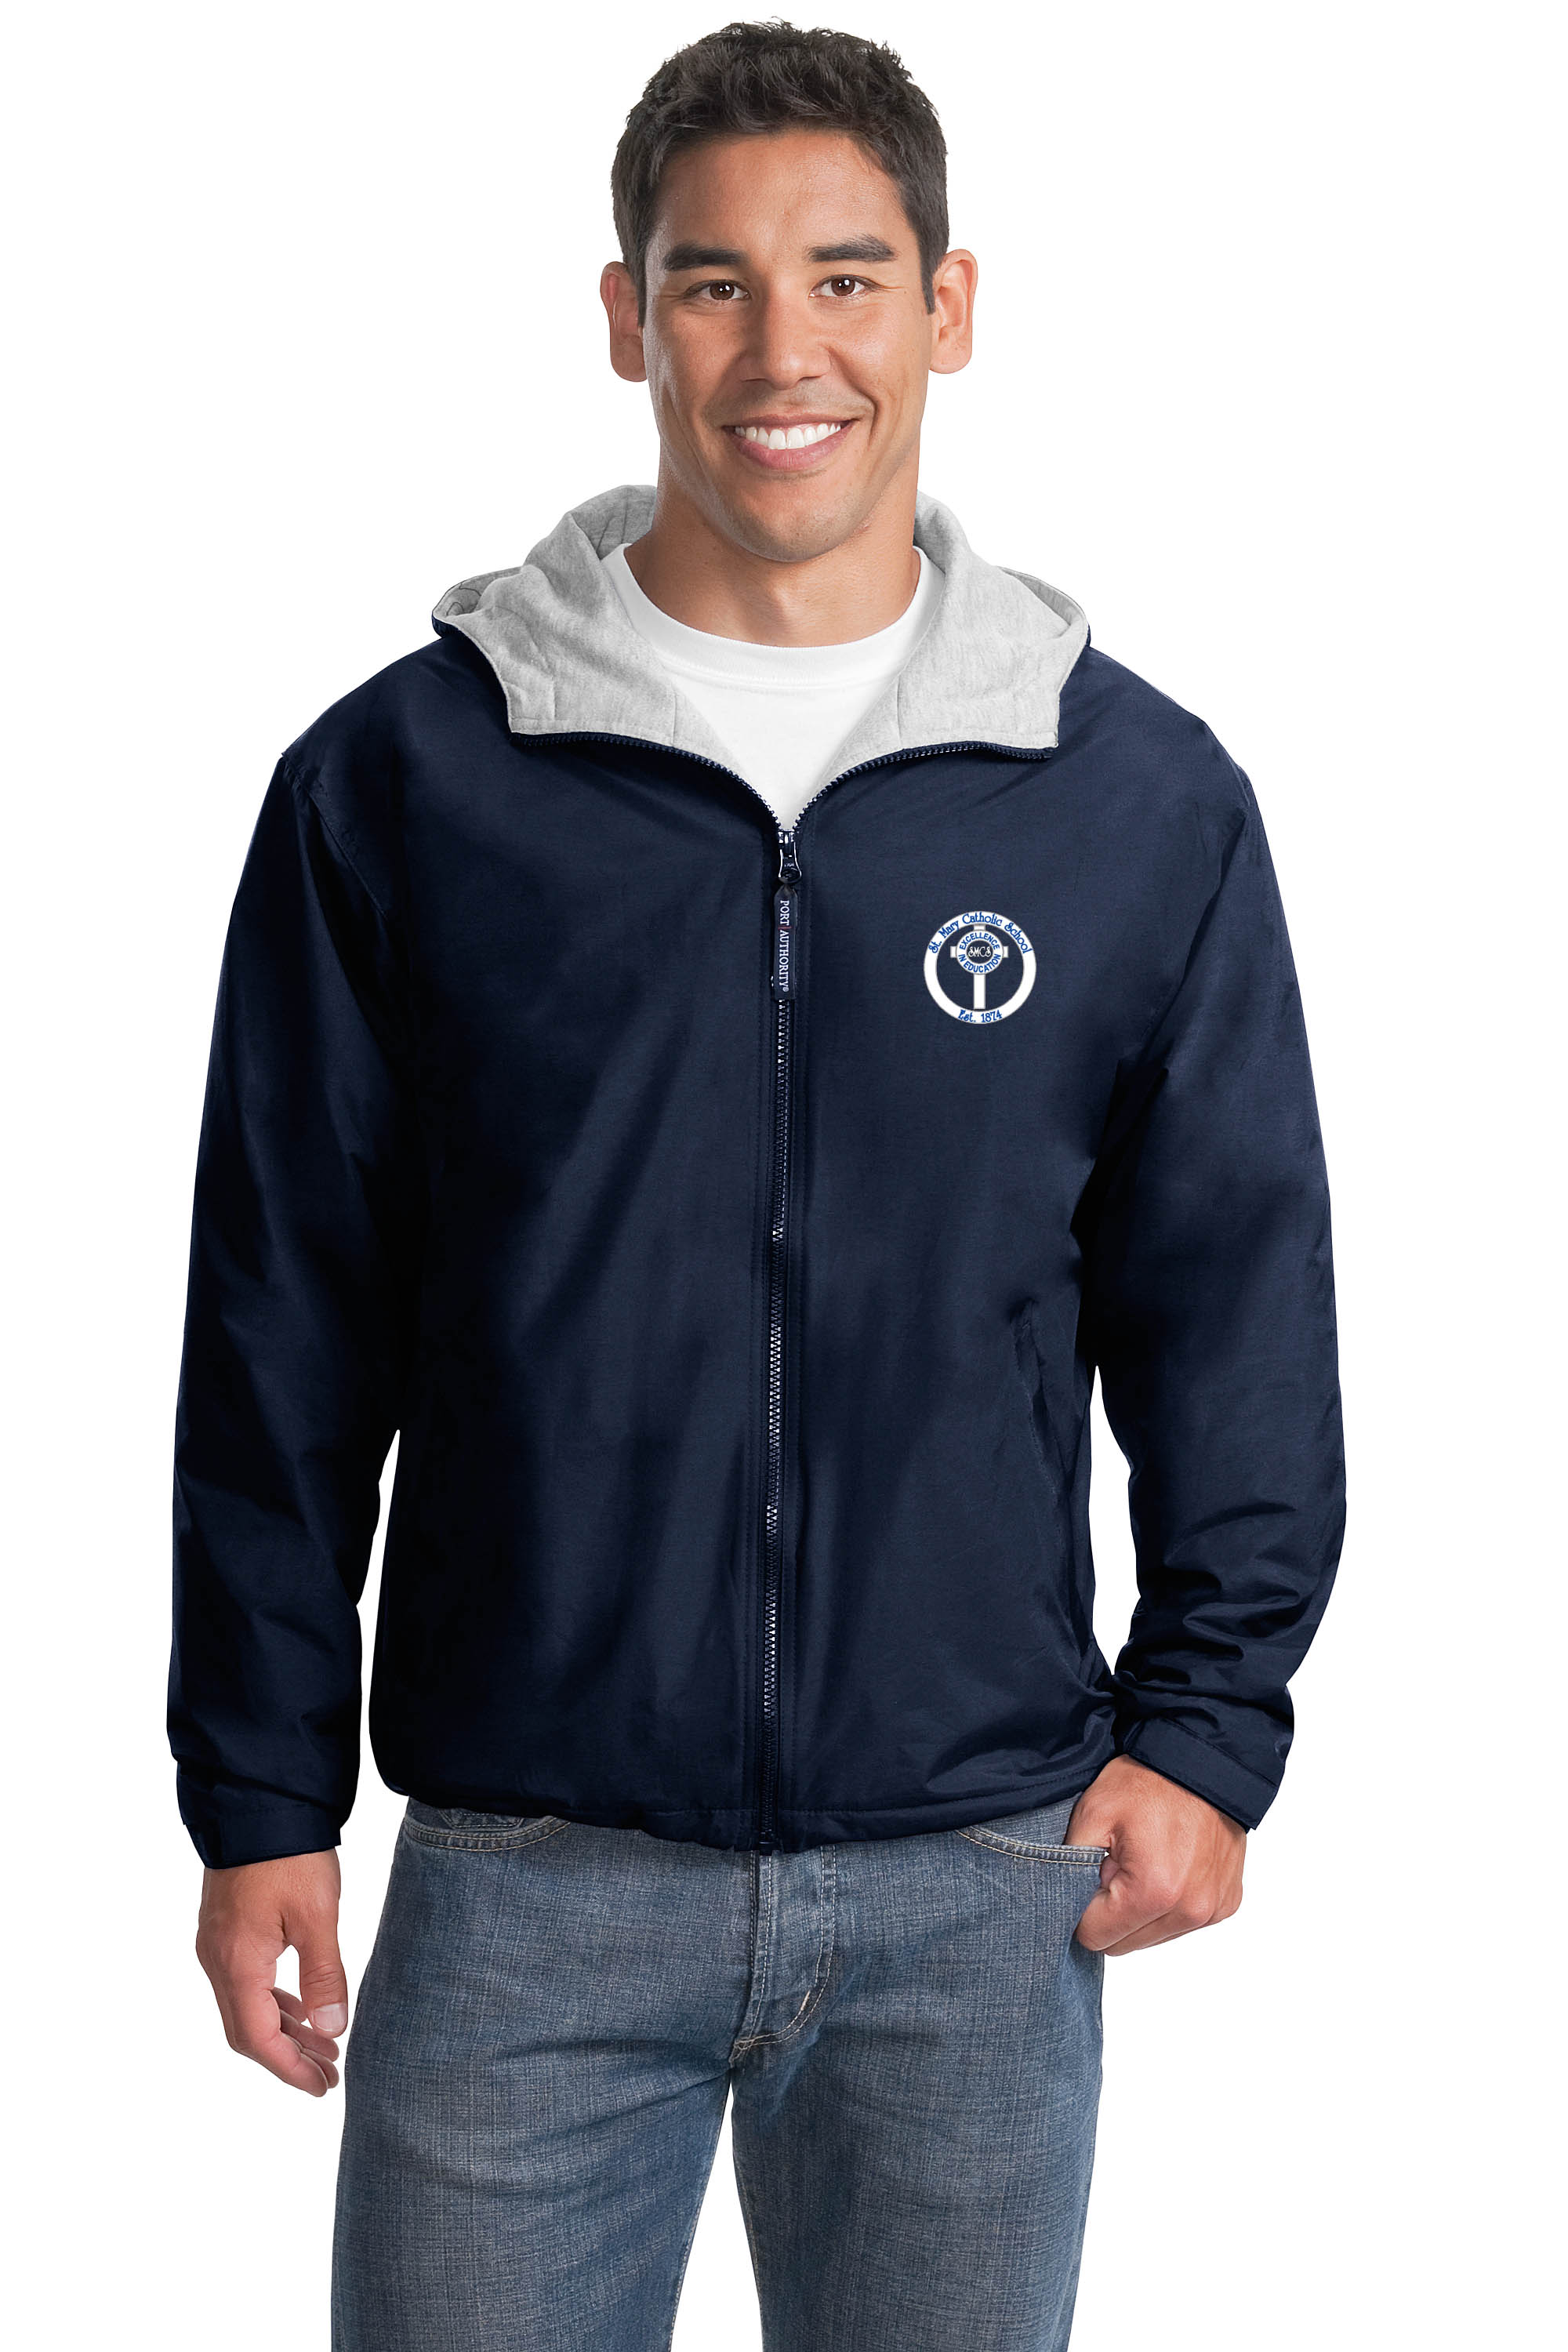 Adult Team Jacket with Logo Embroidered Left Chest